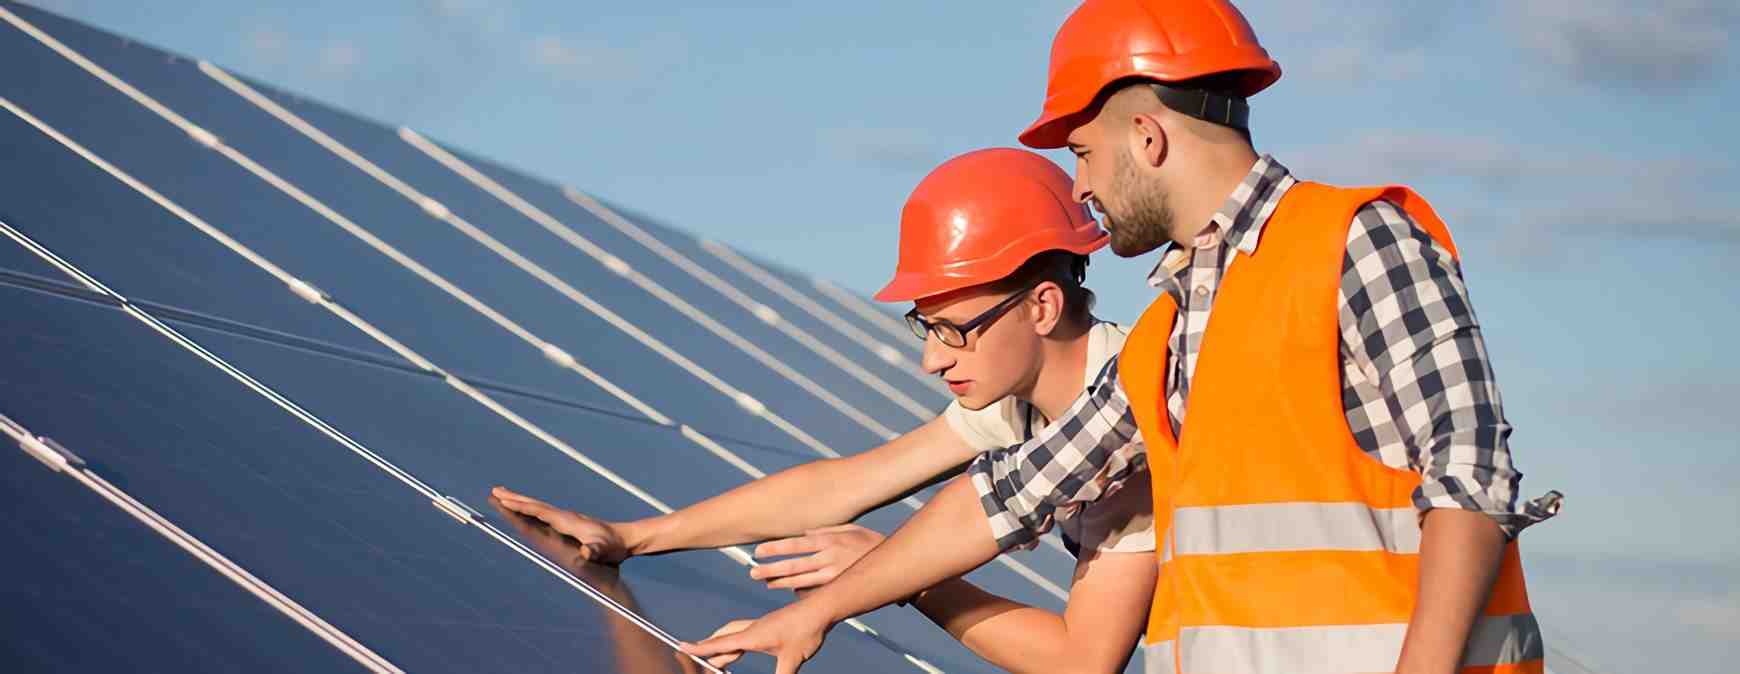 Is being a solar panel installer hard?